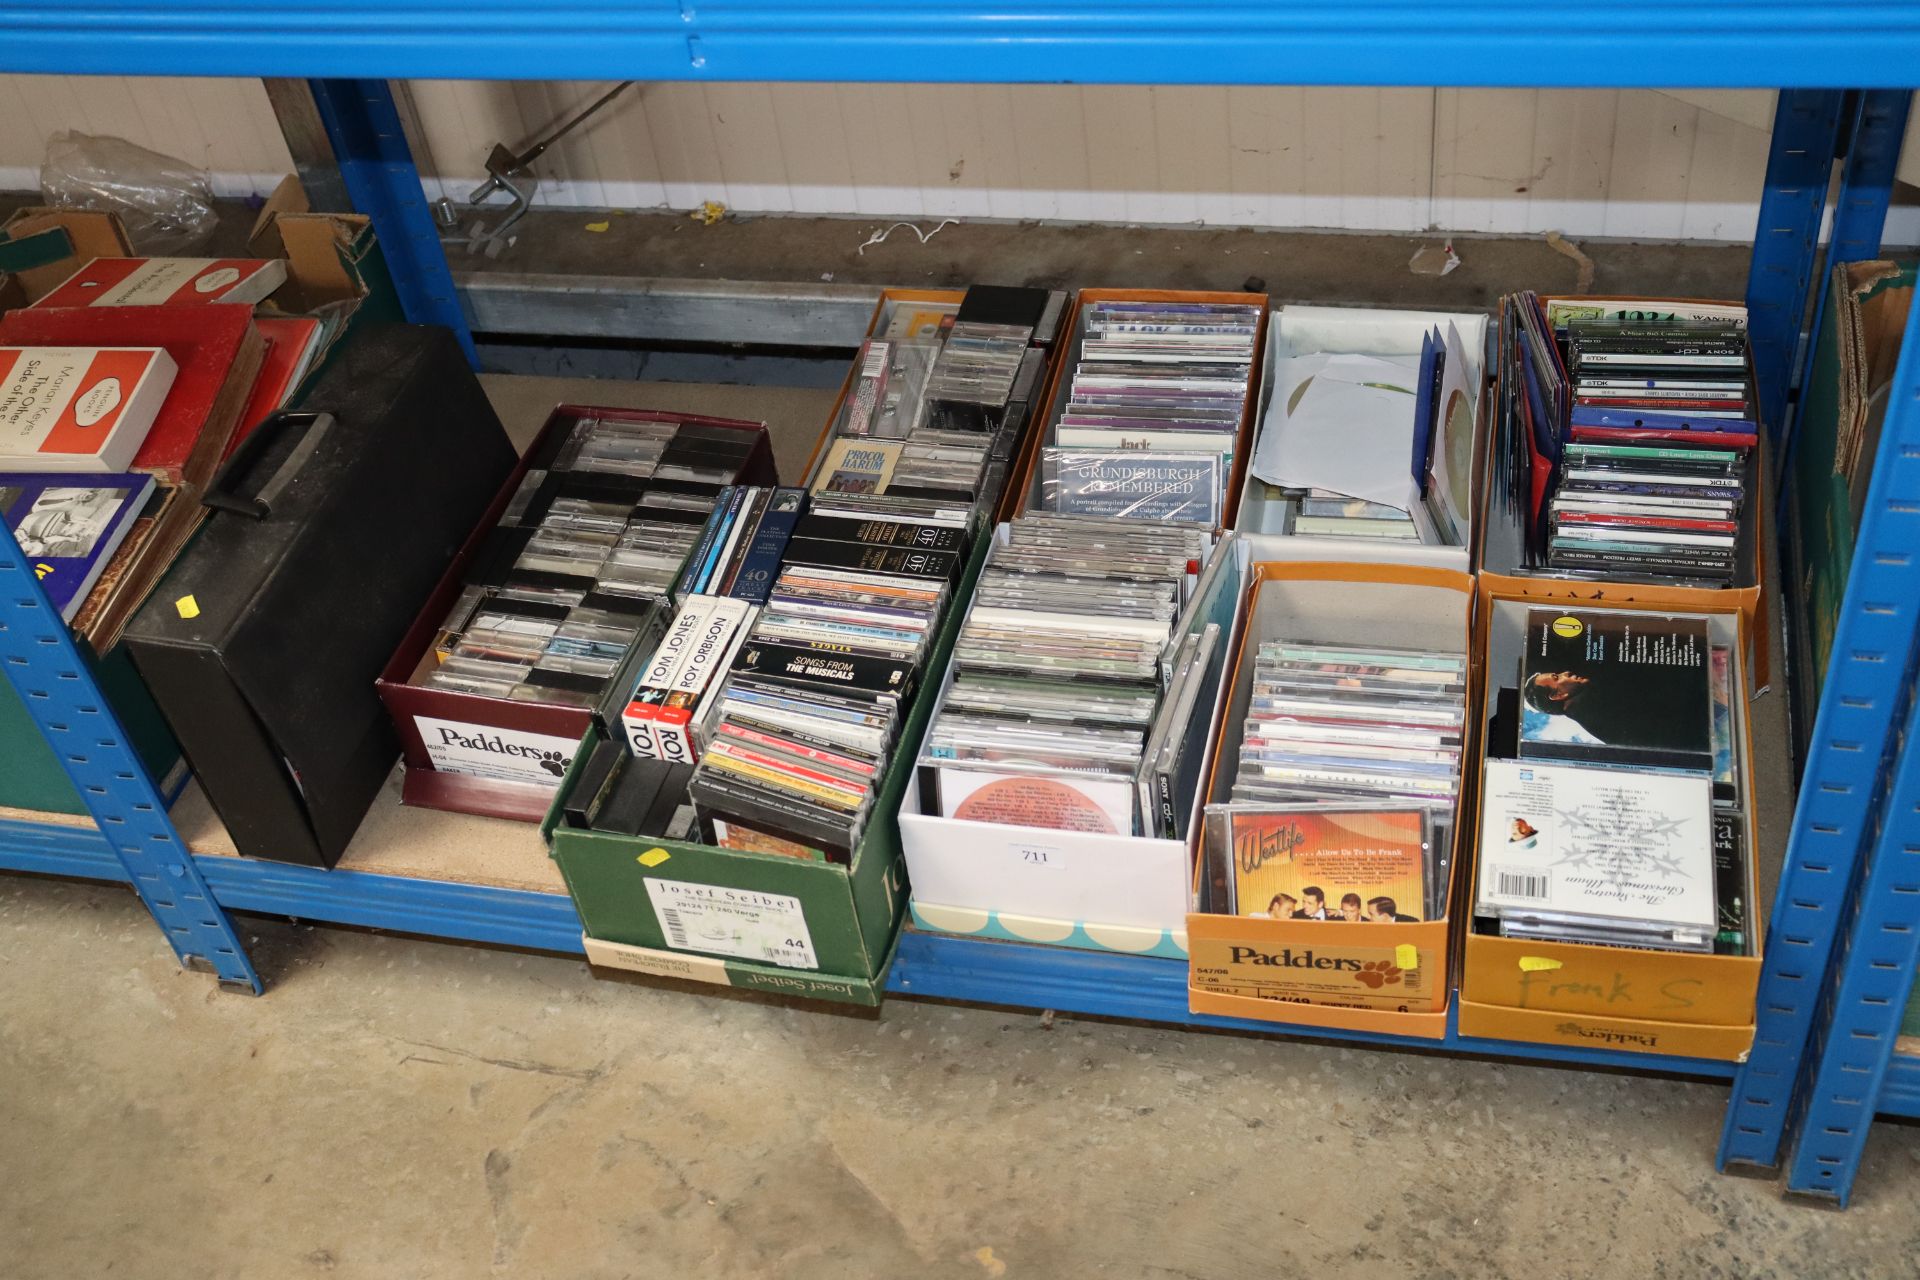 A quantity of various CDs